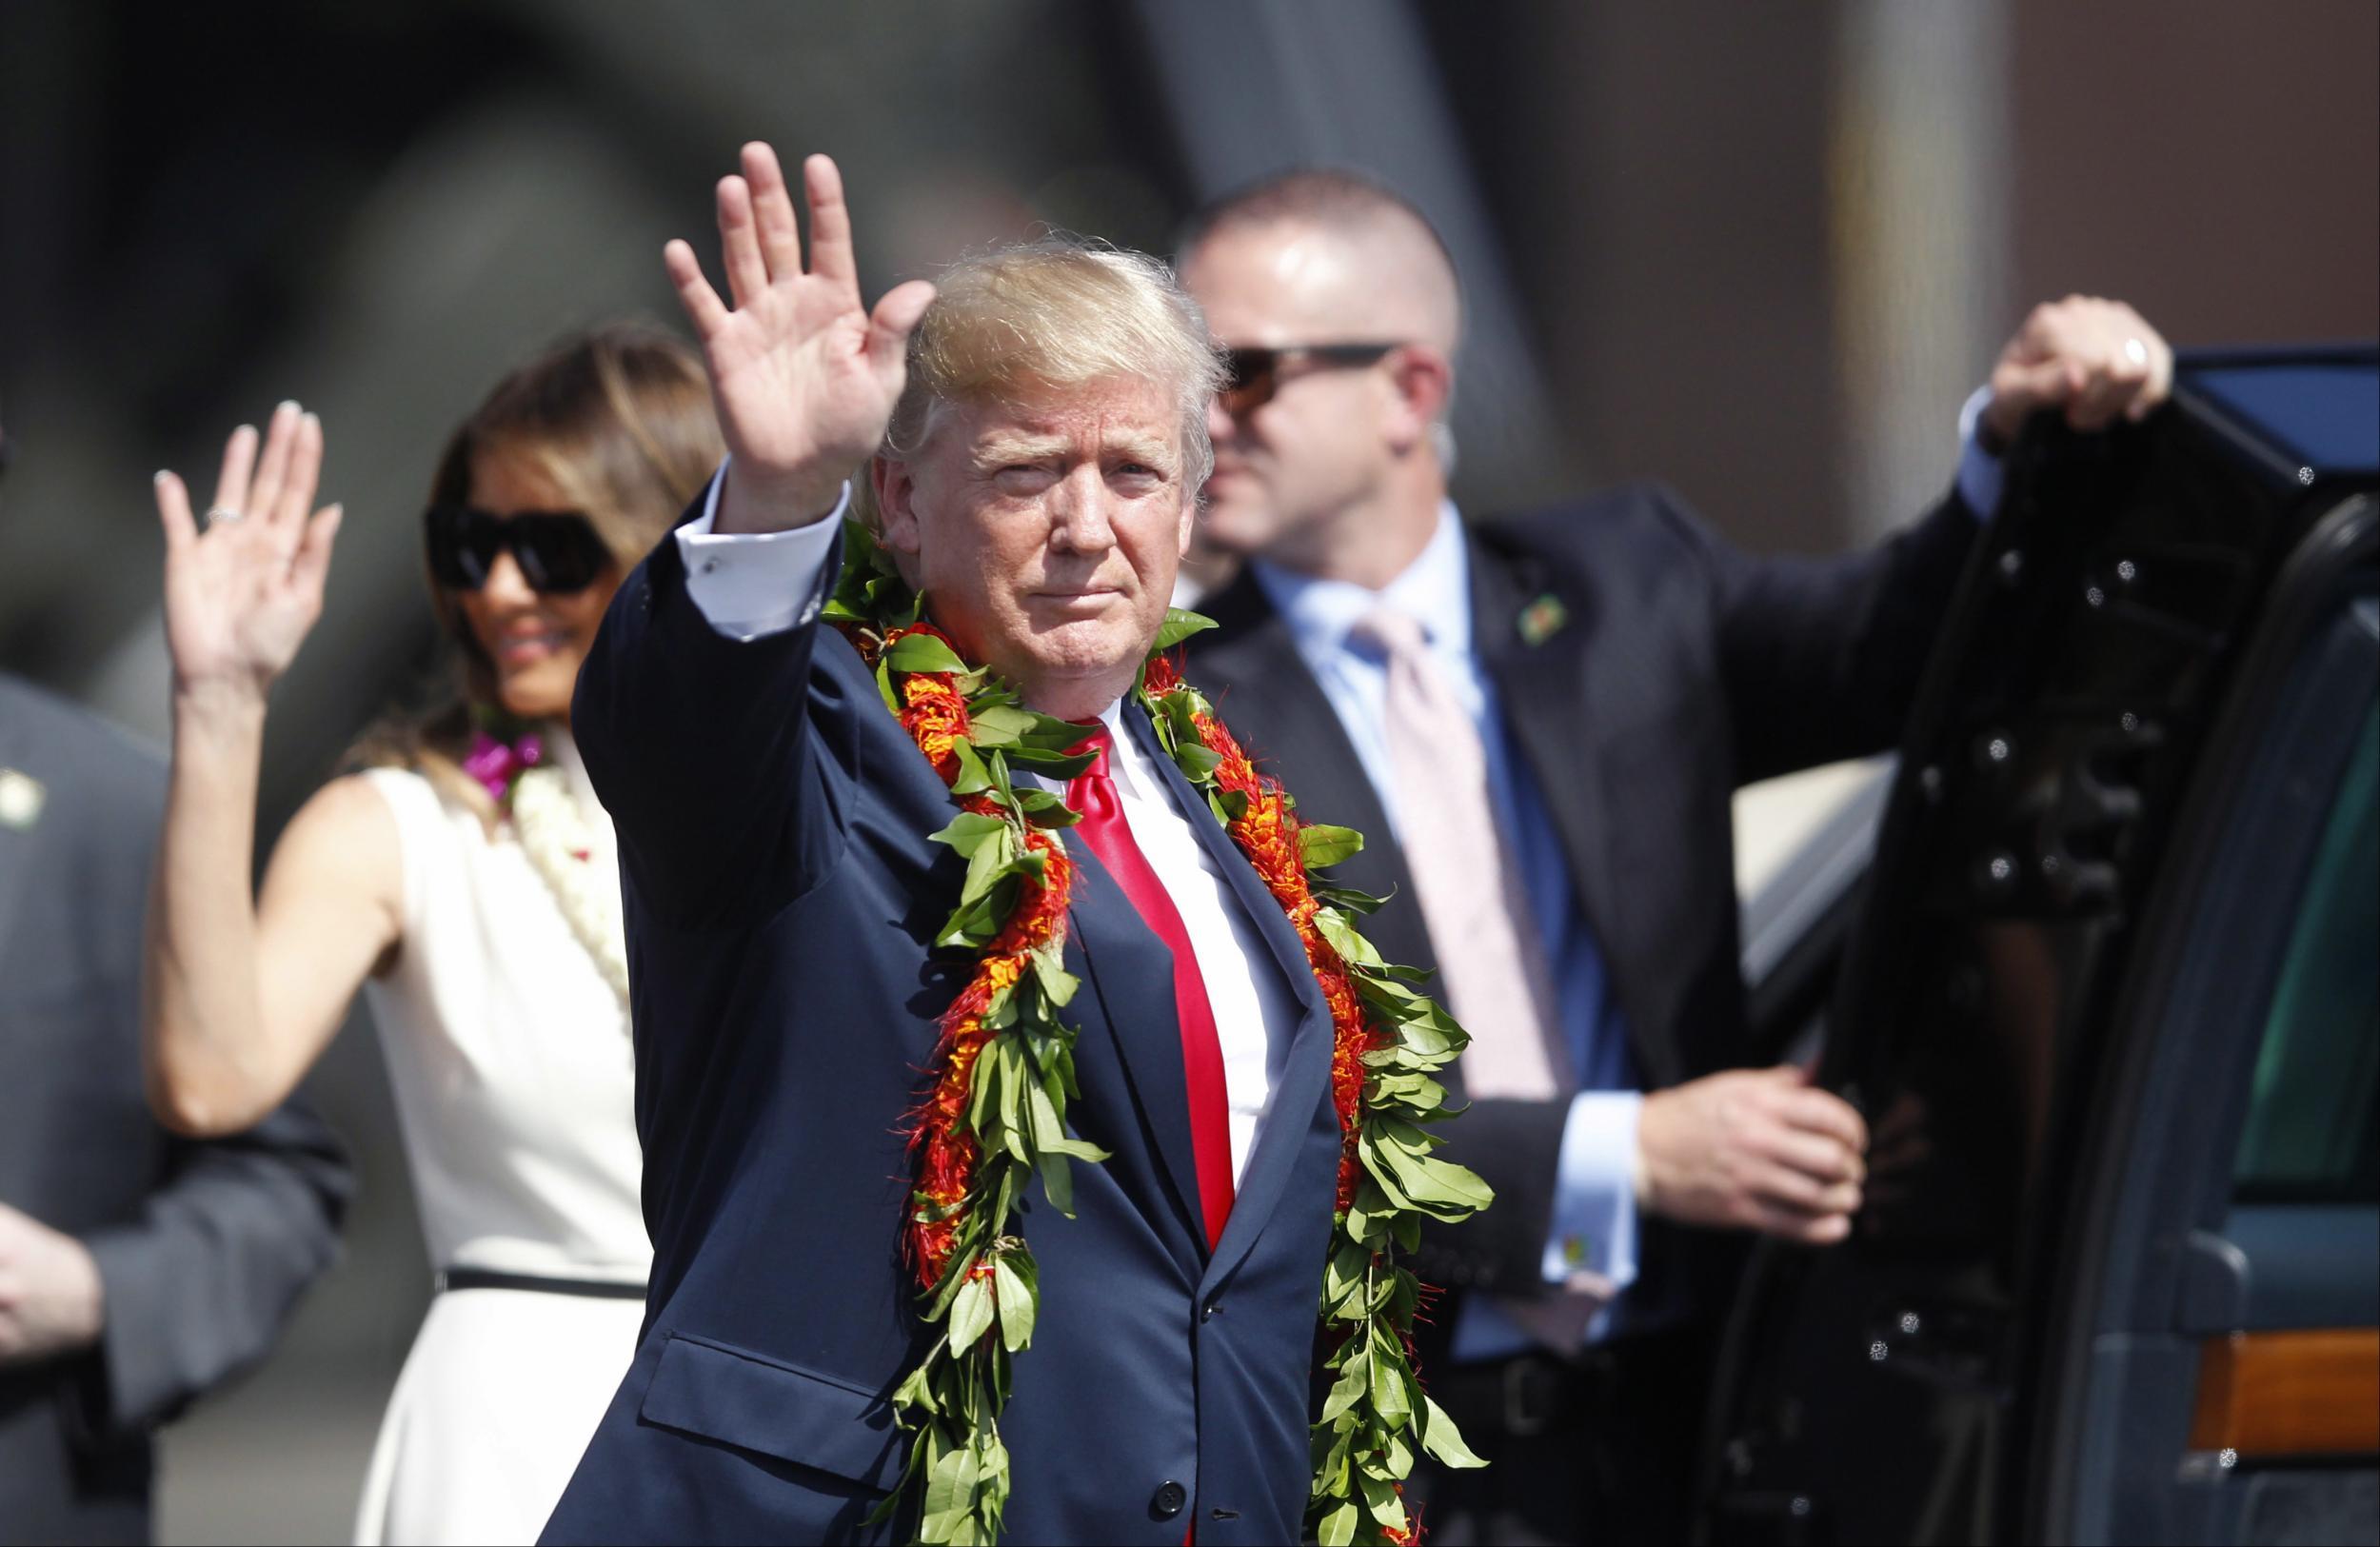 Adorned with lei, President Donald Trump walks towards the motorcade with first lady Melania Trump in Honolulu